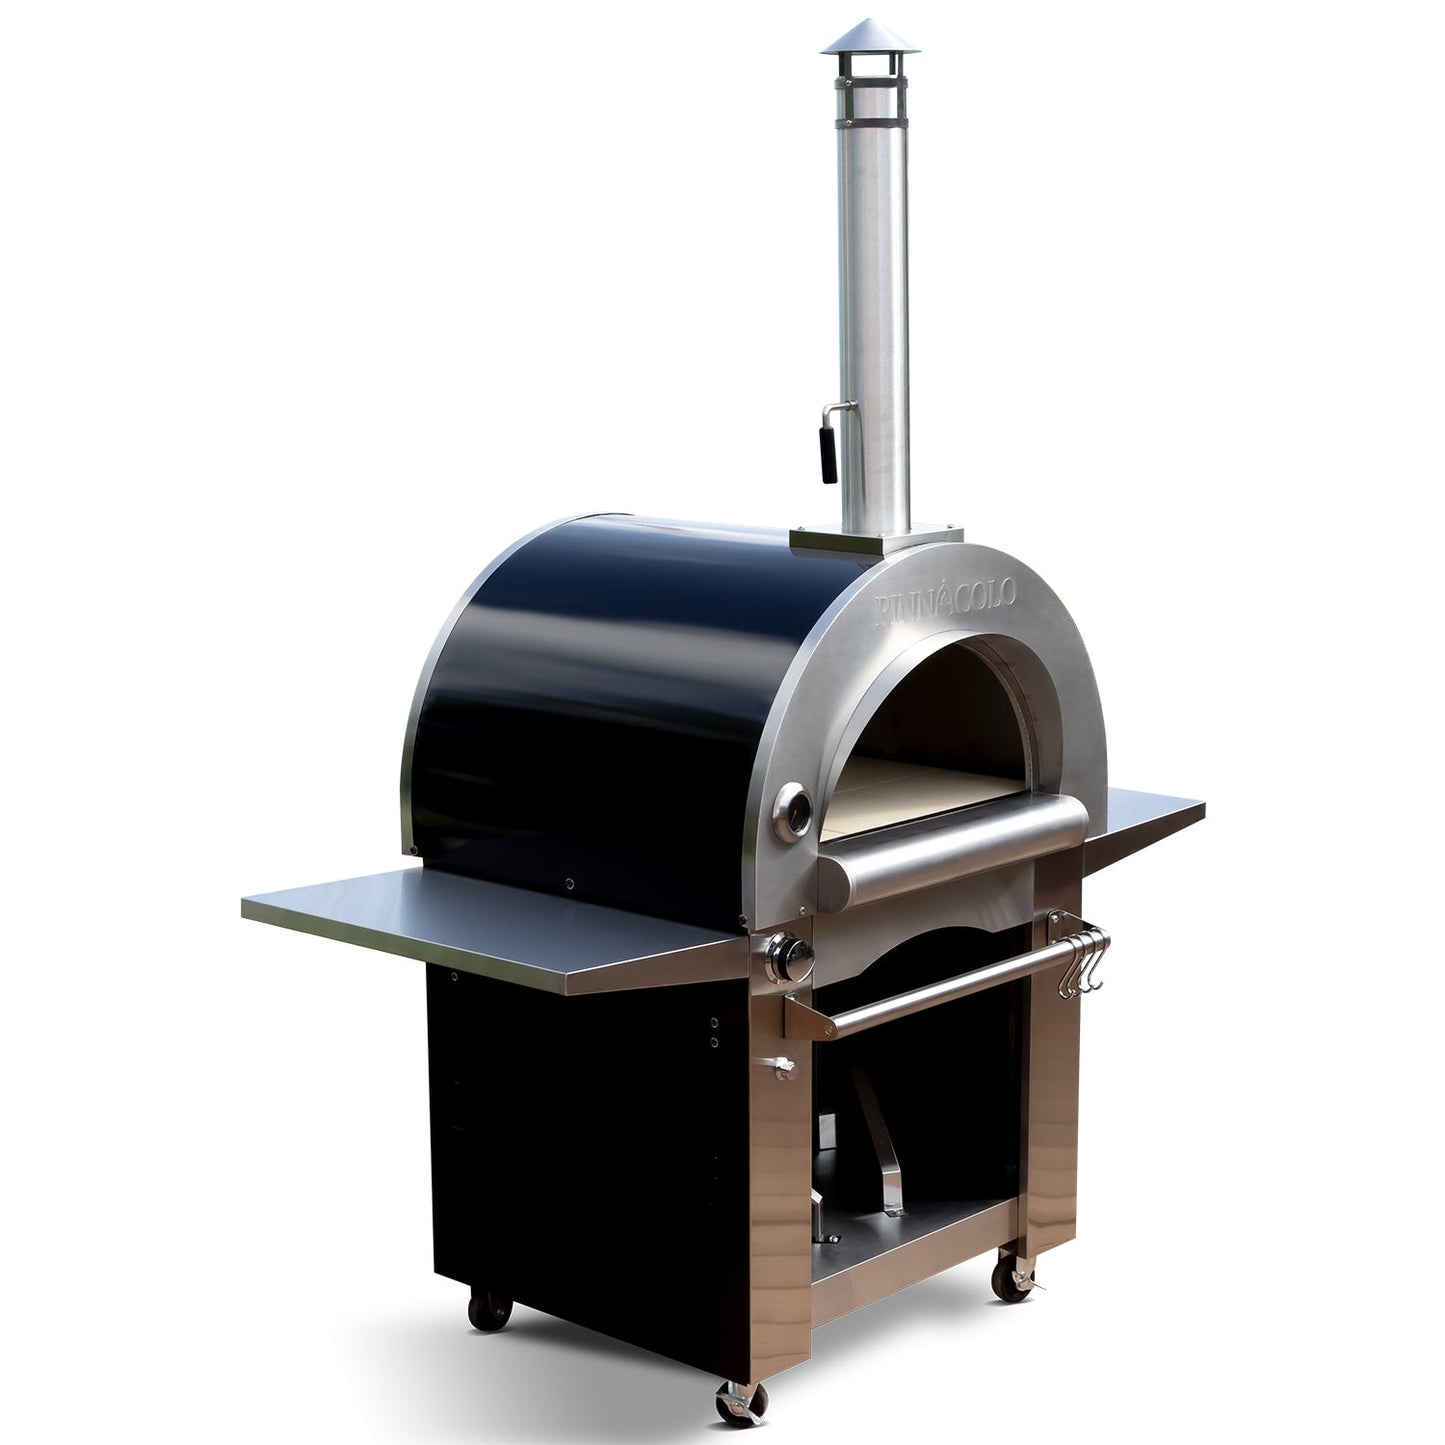 Pinnacolo Ibrido (Hybrid) Gas Wood Pizza Oven With Accessories